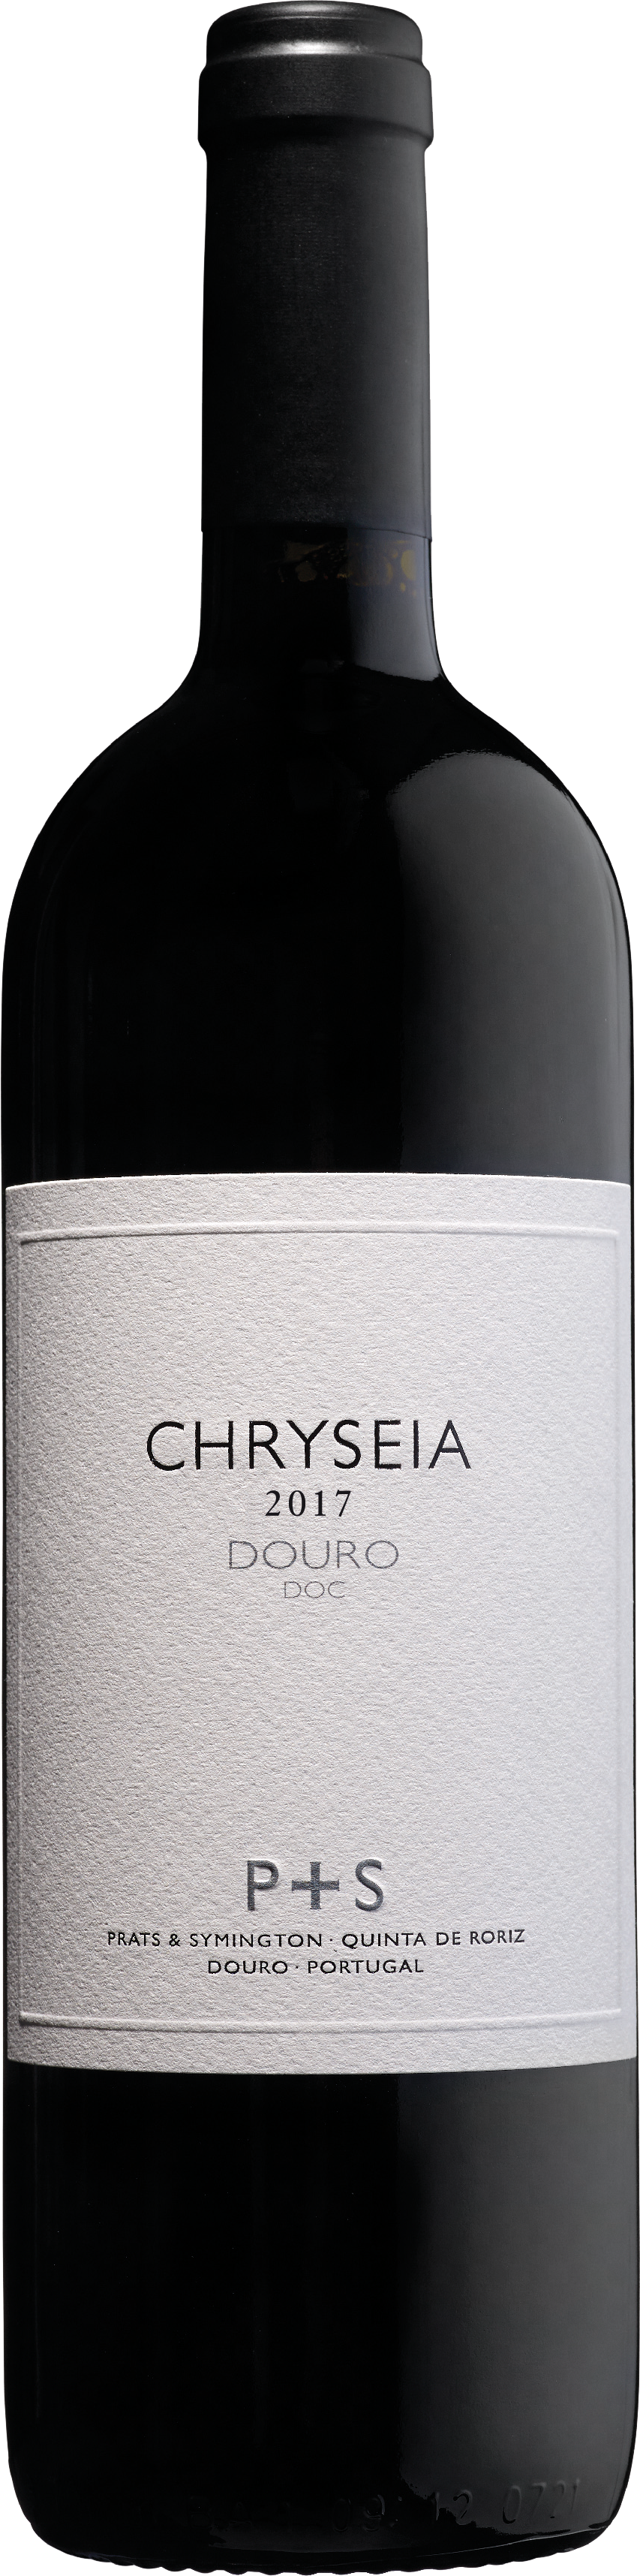 Product Image for P&S CHRYSEIA DOURO RED 2017 - MAGNUM (1.5L)